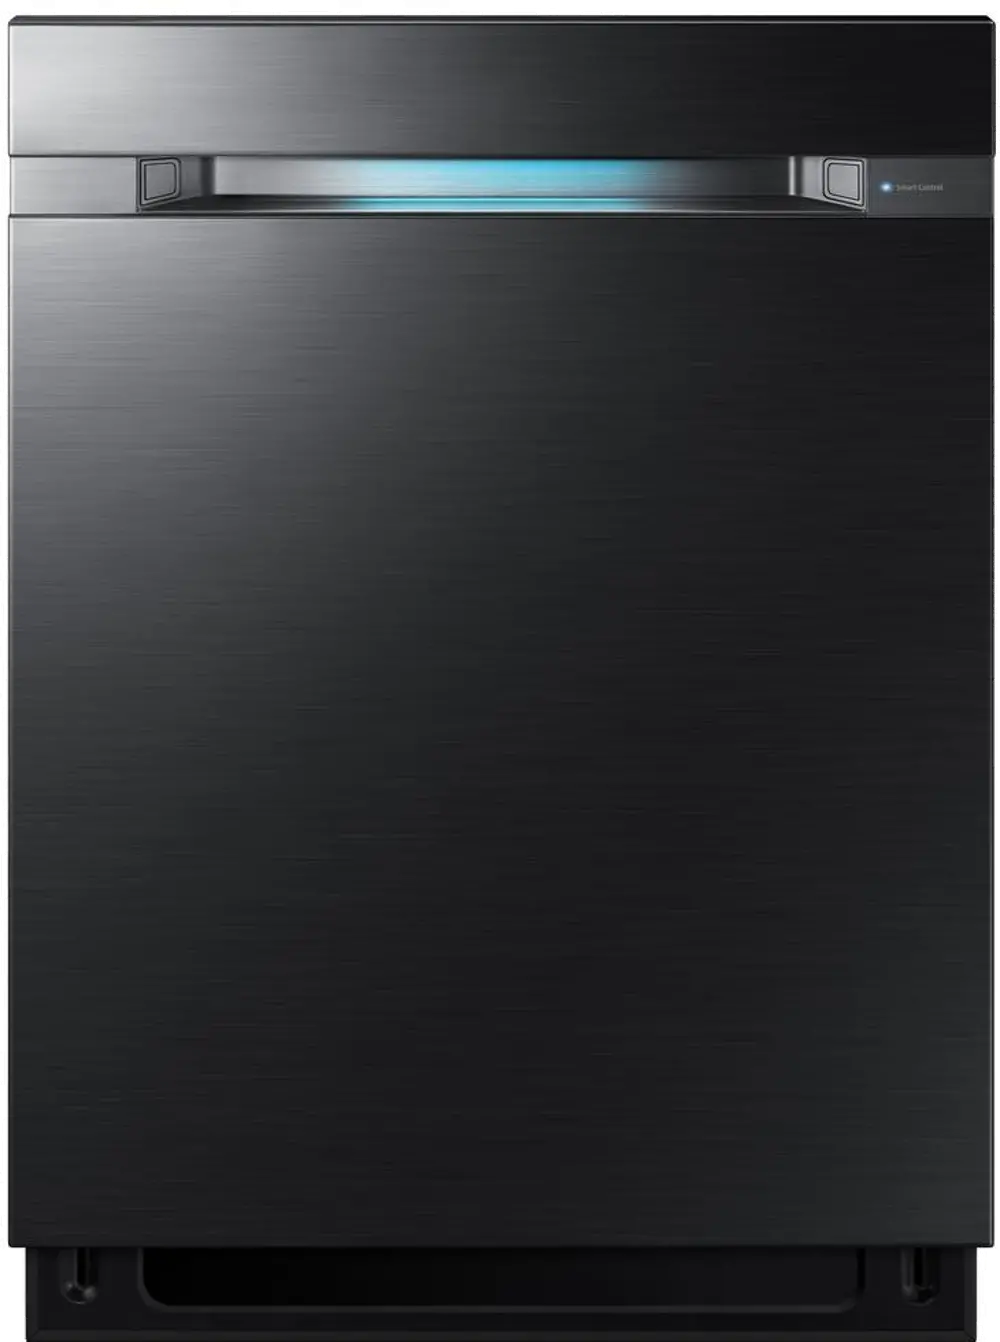 DW80M9960UG Samsung Dishwasher with Stainless Steel Tub - Black Stainless Steel -1